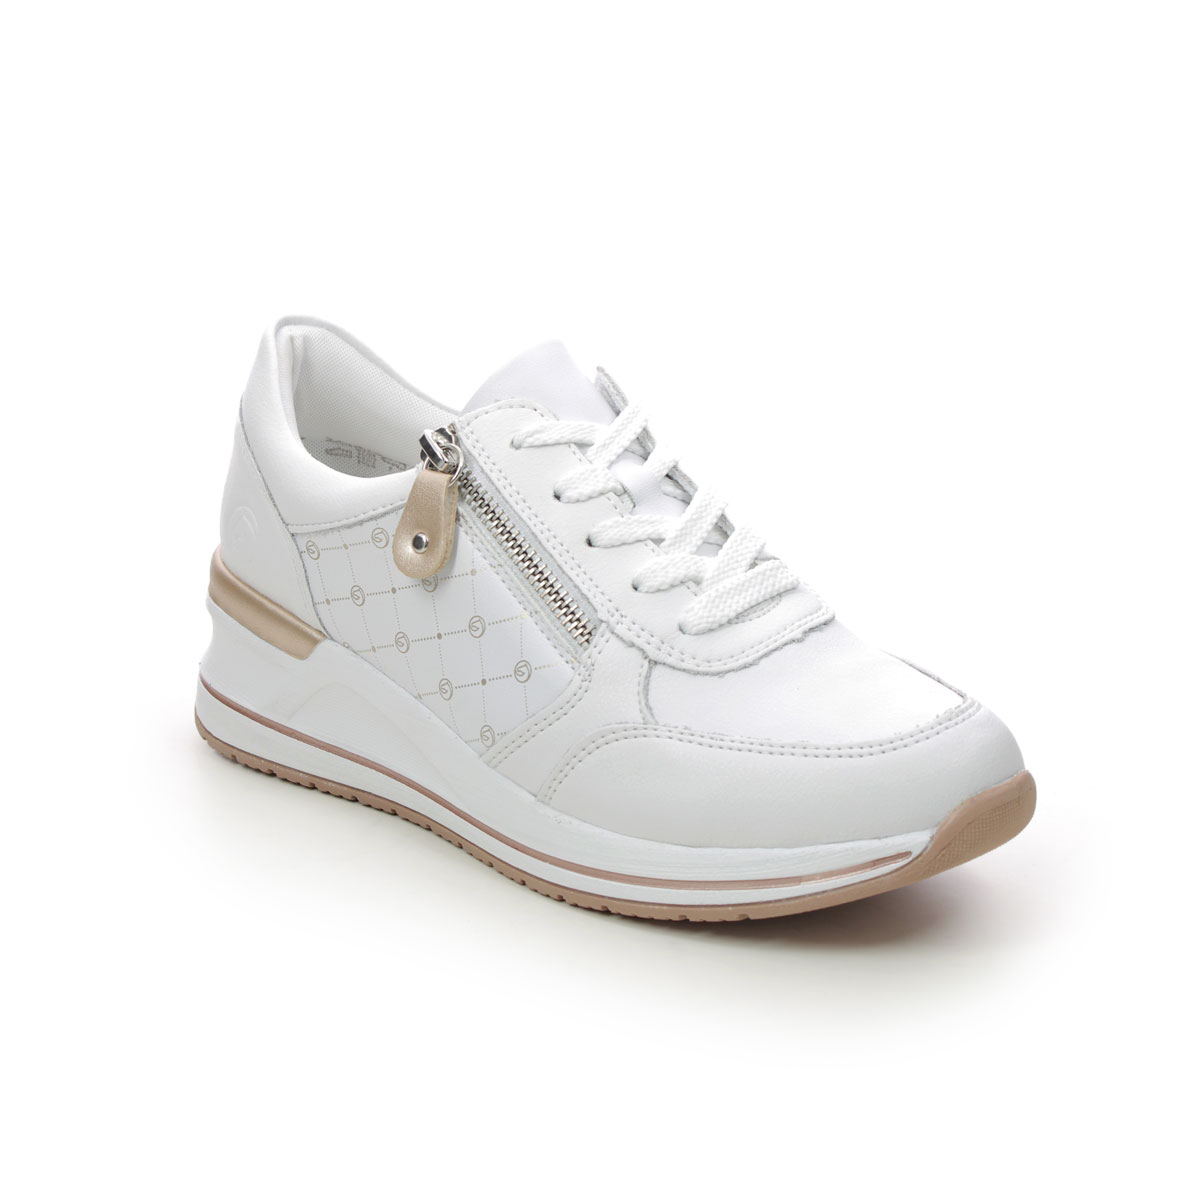 Remonte D3211-80 Sea Wedge Zip White Rose gold Womens trainers in a Plain Leather and Man-made in Size 39